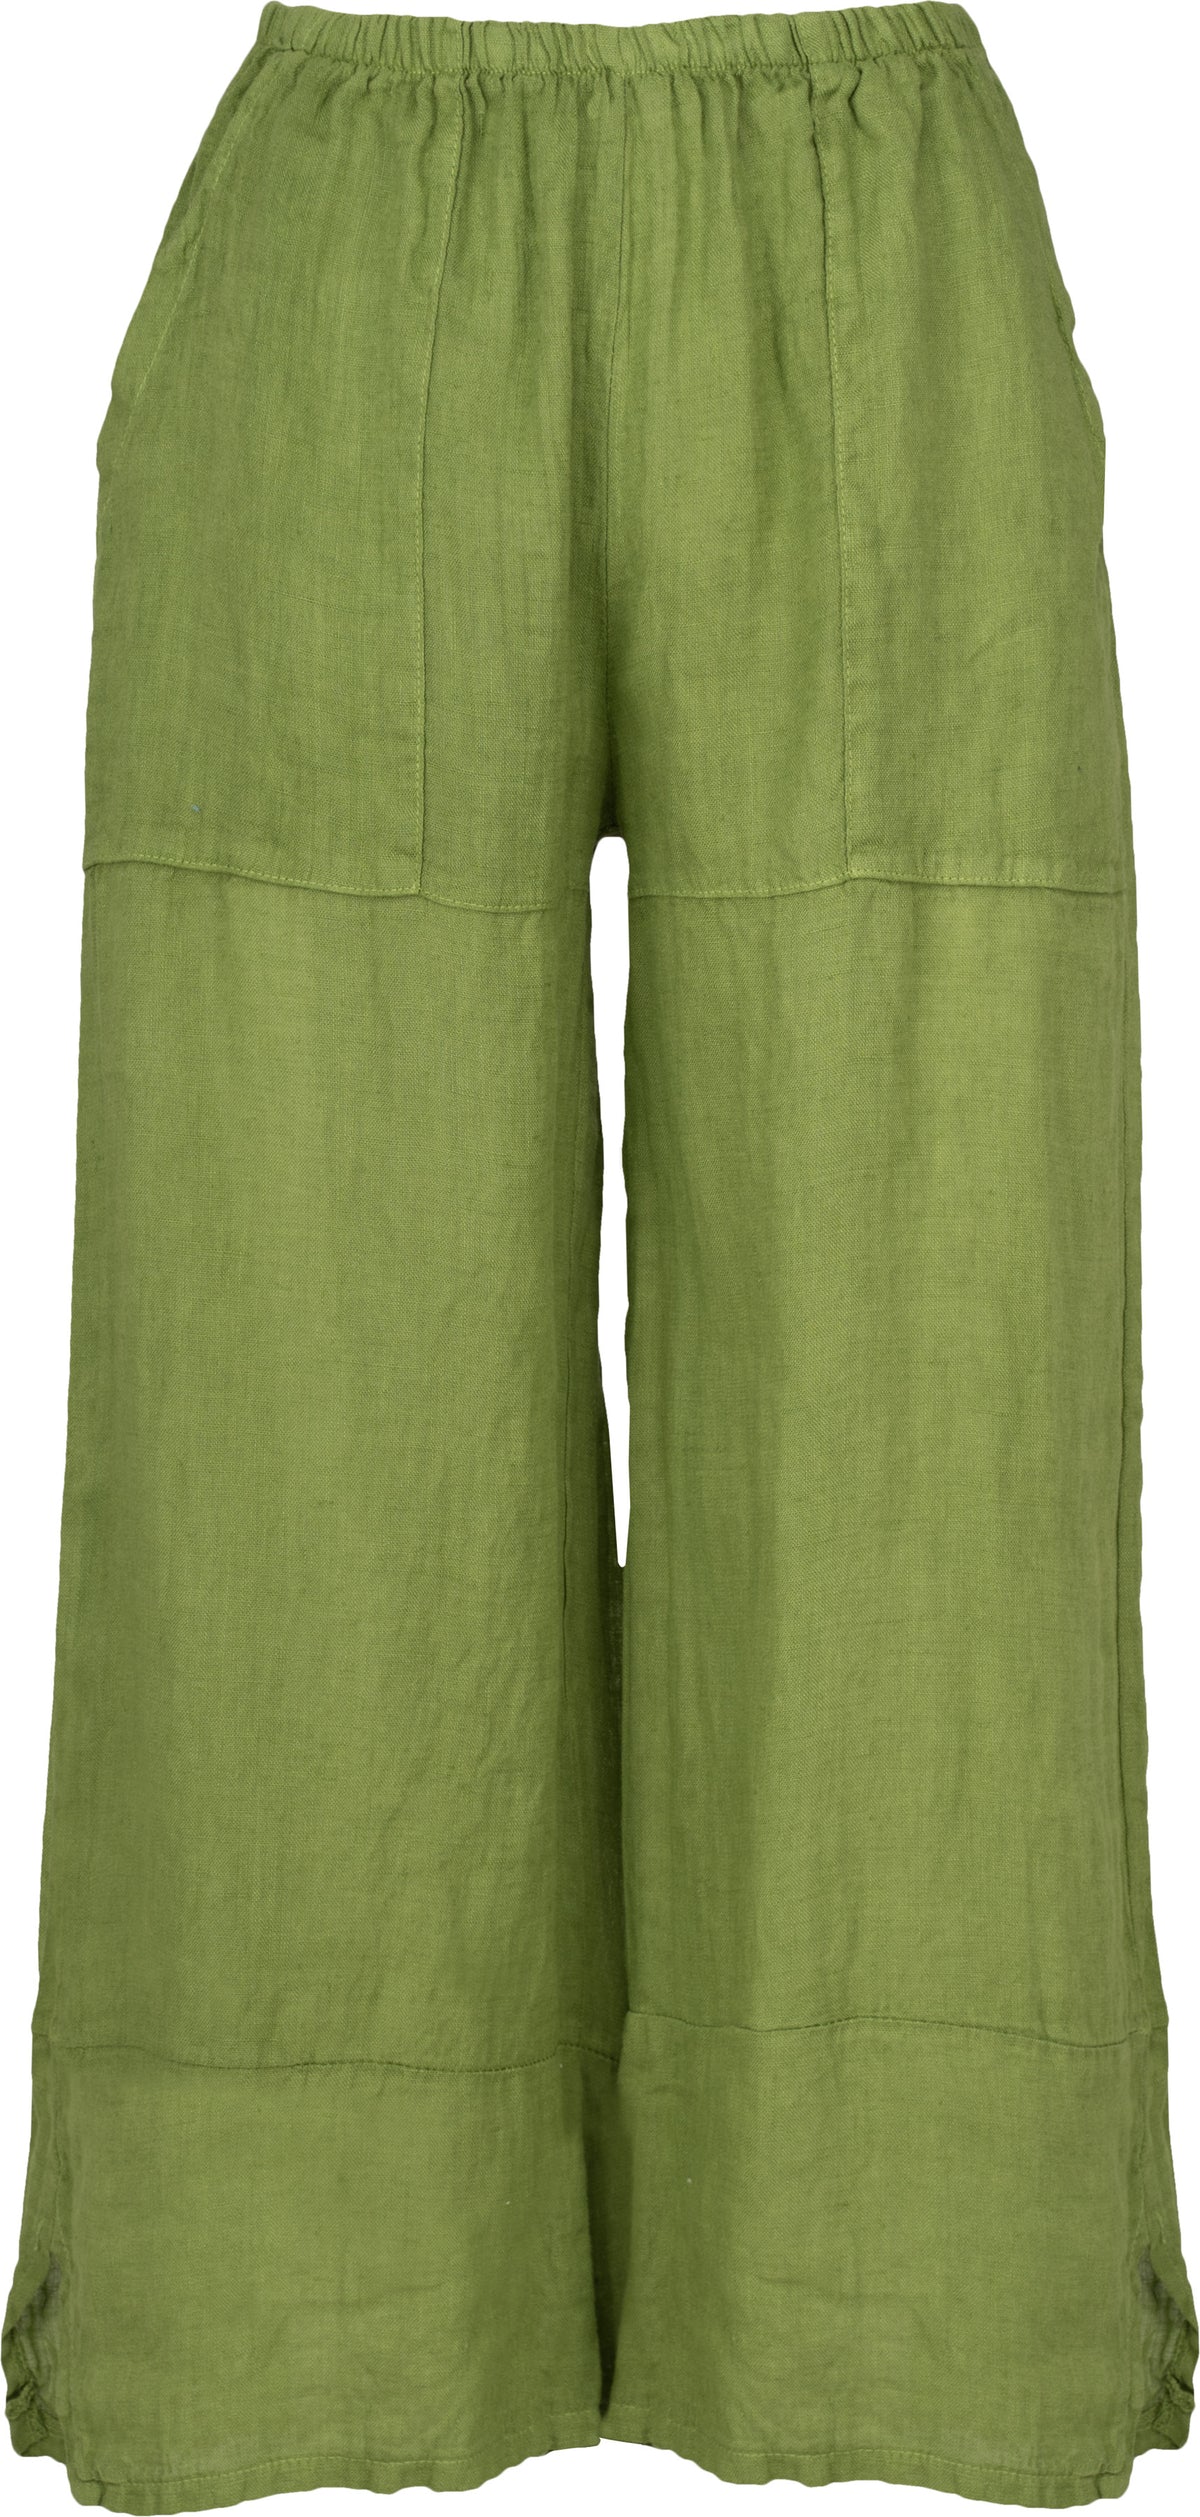 M Made in Italy Linen Pants 11/3273Q (2 colours)